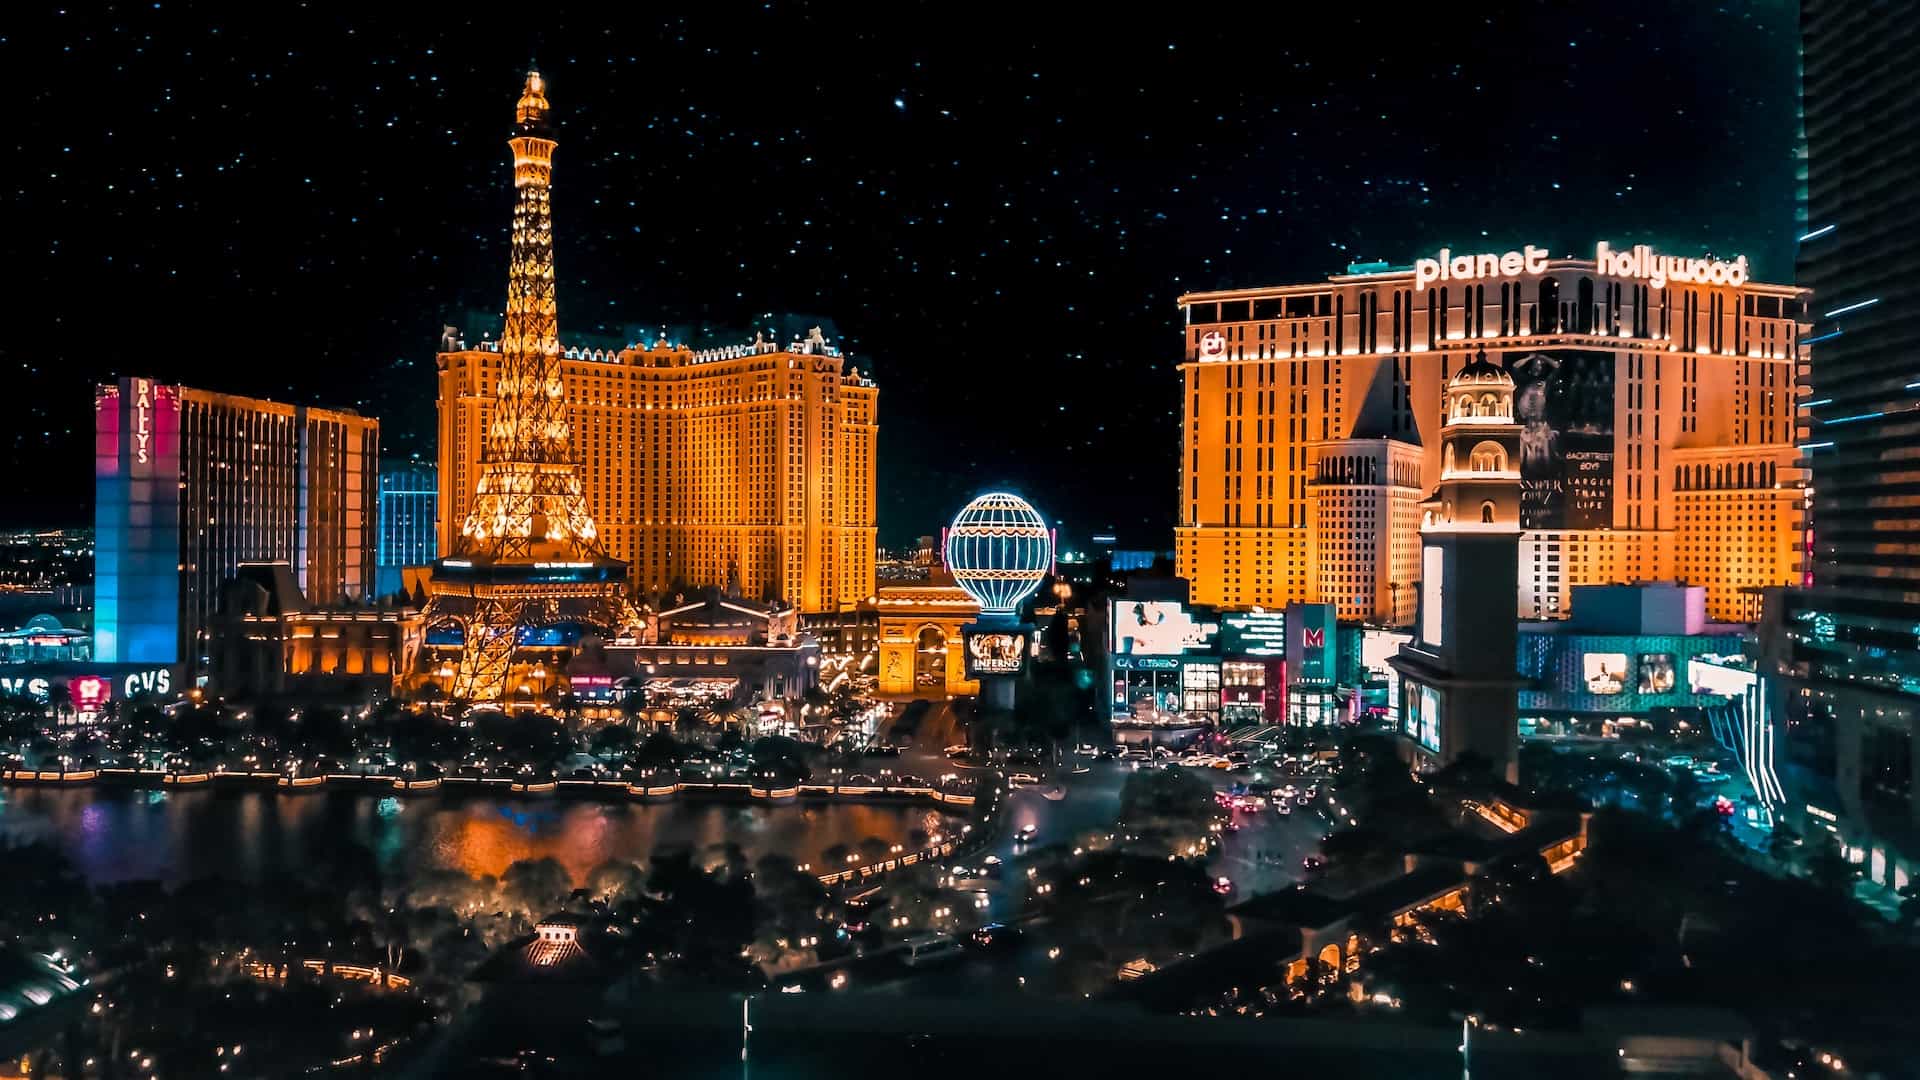 A premium view of several world-renowned casino and hotel resorts in the center of downtown Las Vegas, Nevada at night, with many lights illuminating the city.